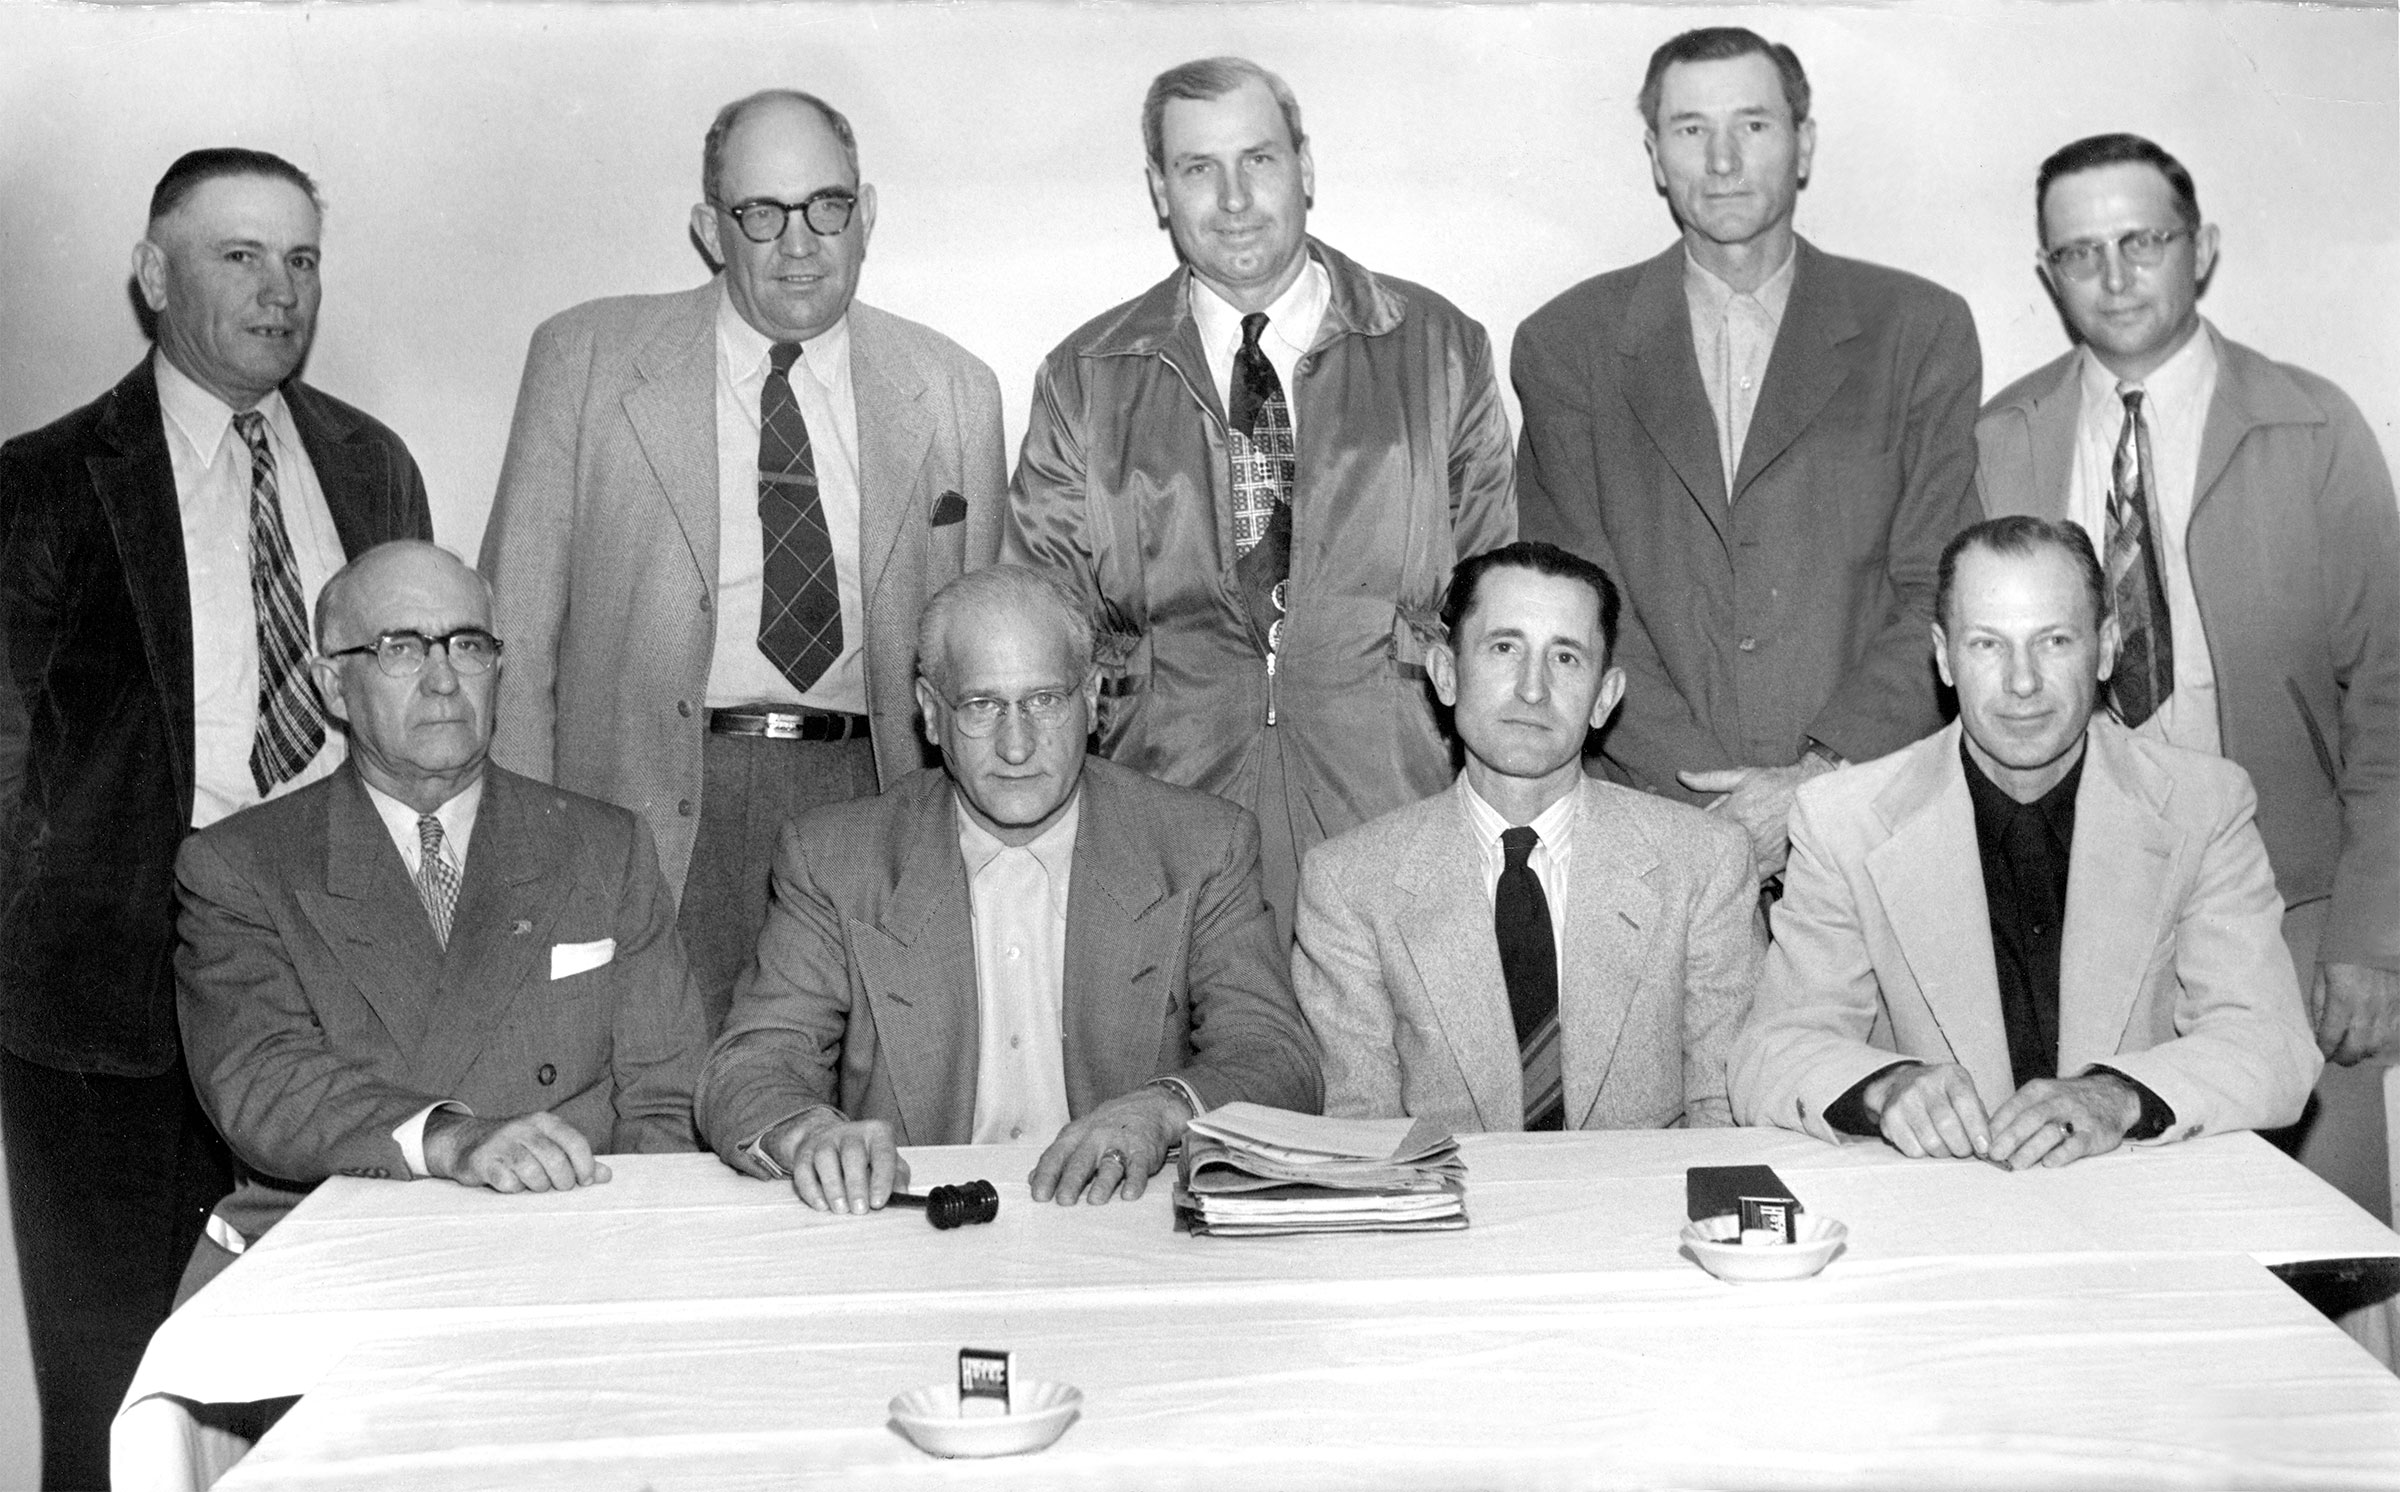 At the 1952 Oklahoma Farm Bureau Convention, two new Farm Bureau districts were created to increase membership, size and potential, bringing the total number of districts to nine. Pictured above is the first nine-member OKFB Board during their January meeting. Seated are (left to right) J.Y. Victor, Secretary; John I. Taylor, President; Lewis H. Munn, Vice President; and Darrell McNutt, Treasurer. Standing are (left to right) Mart Fowler, Harold Davis, F.W. Kannady, C.E. Weller and Glen Johnson.